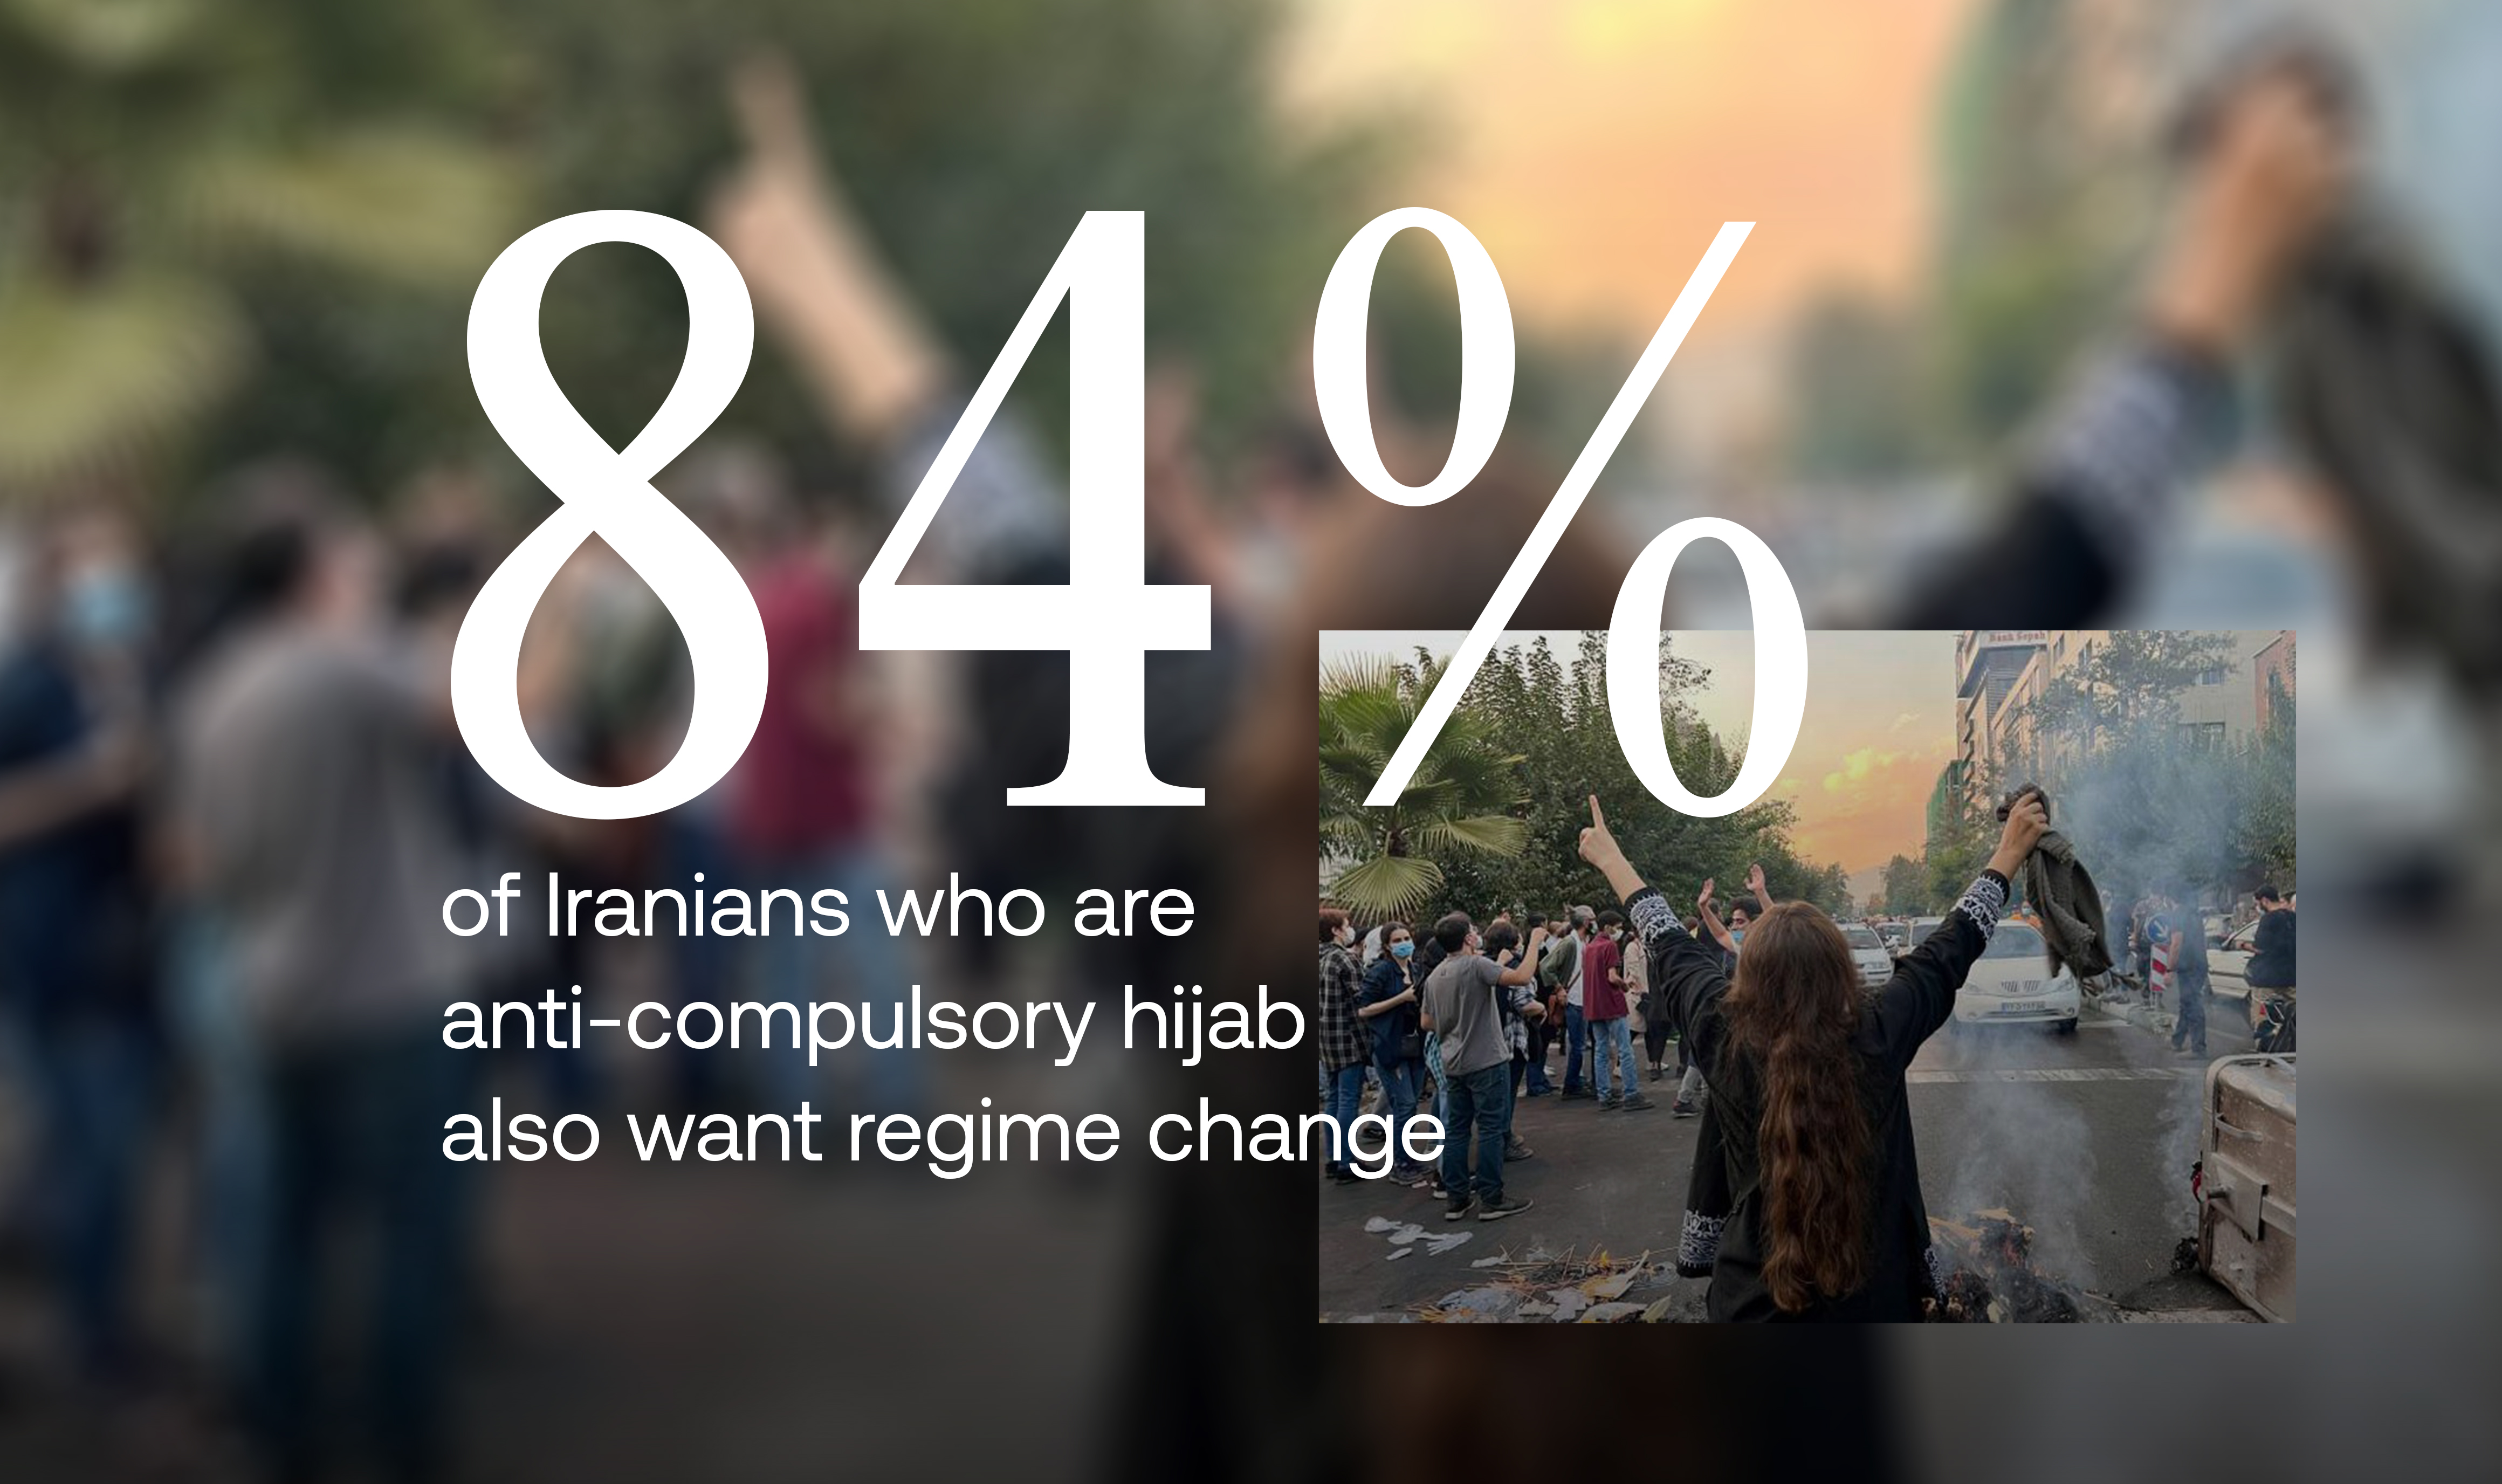 protests-and-polling-insights-streets-iran-how-removal-hijab-became-symbol-regime-change - d505f990-80ae-4c9d-91fb-e7dedf9d7d34